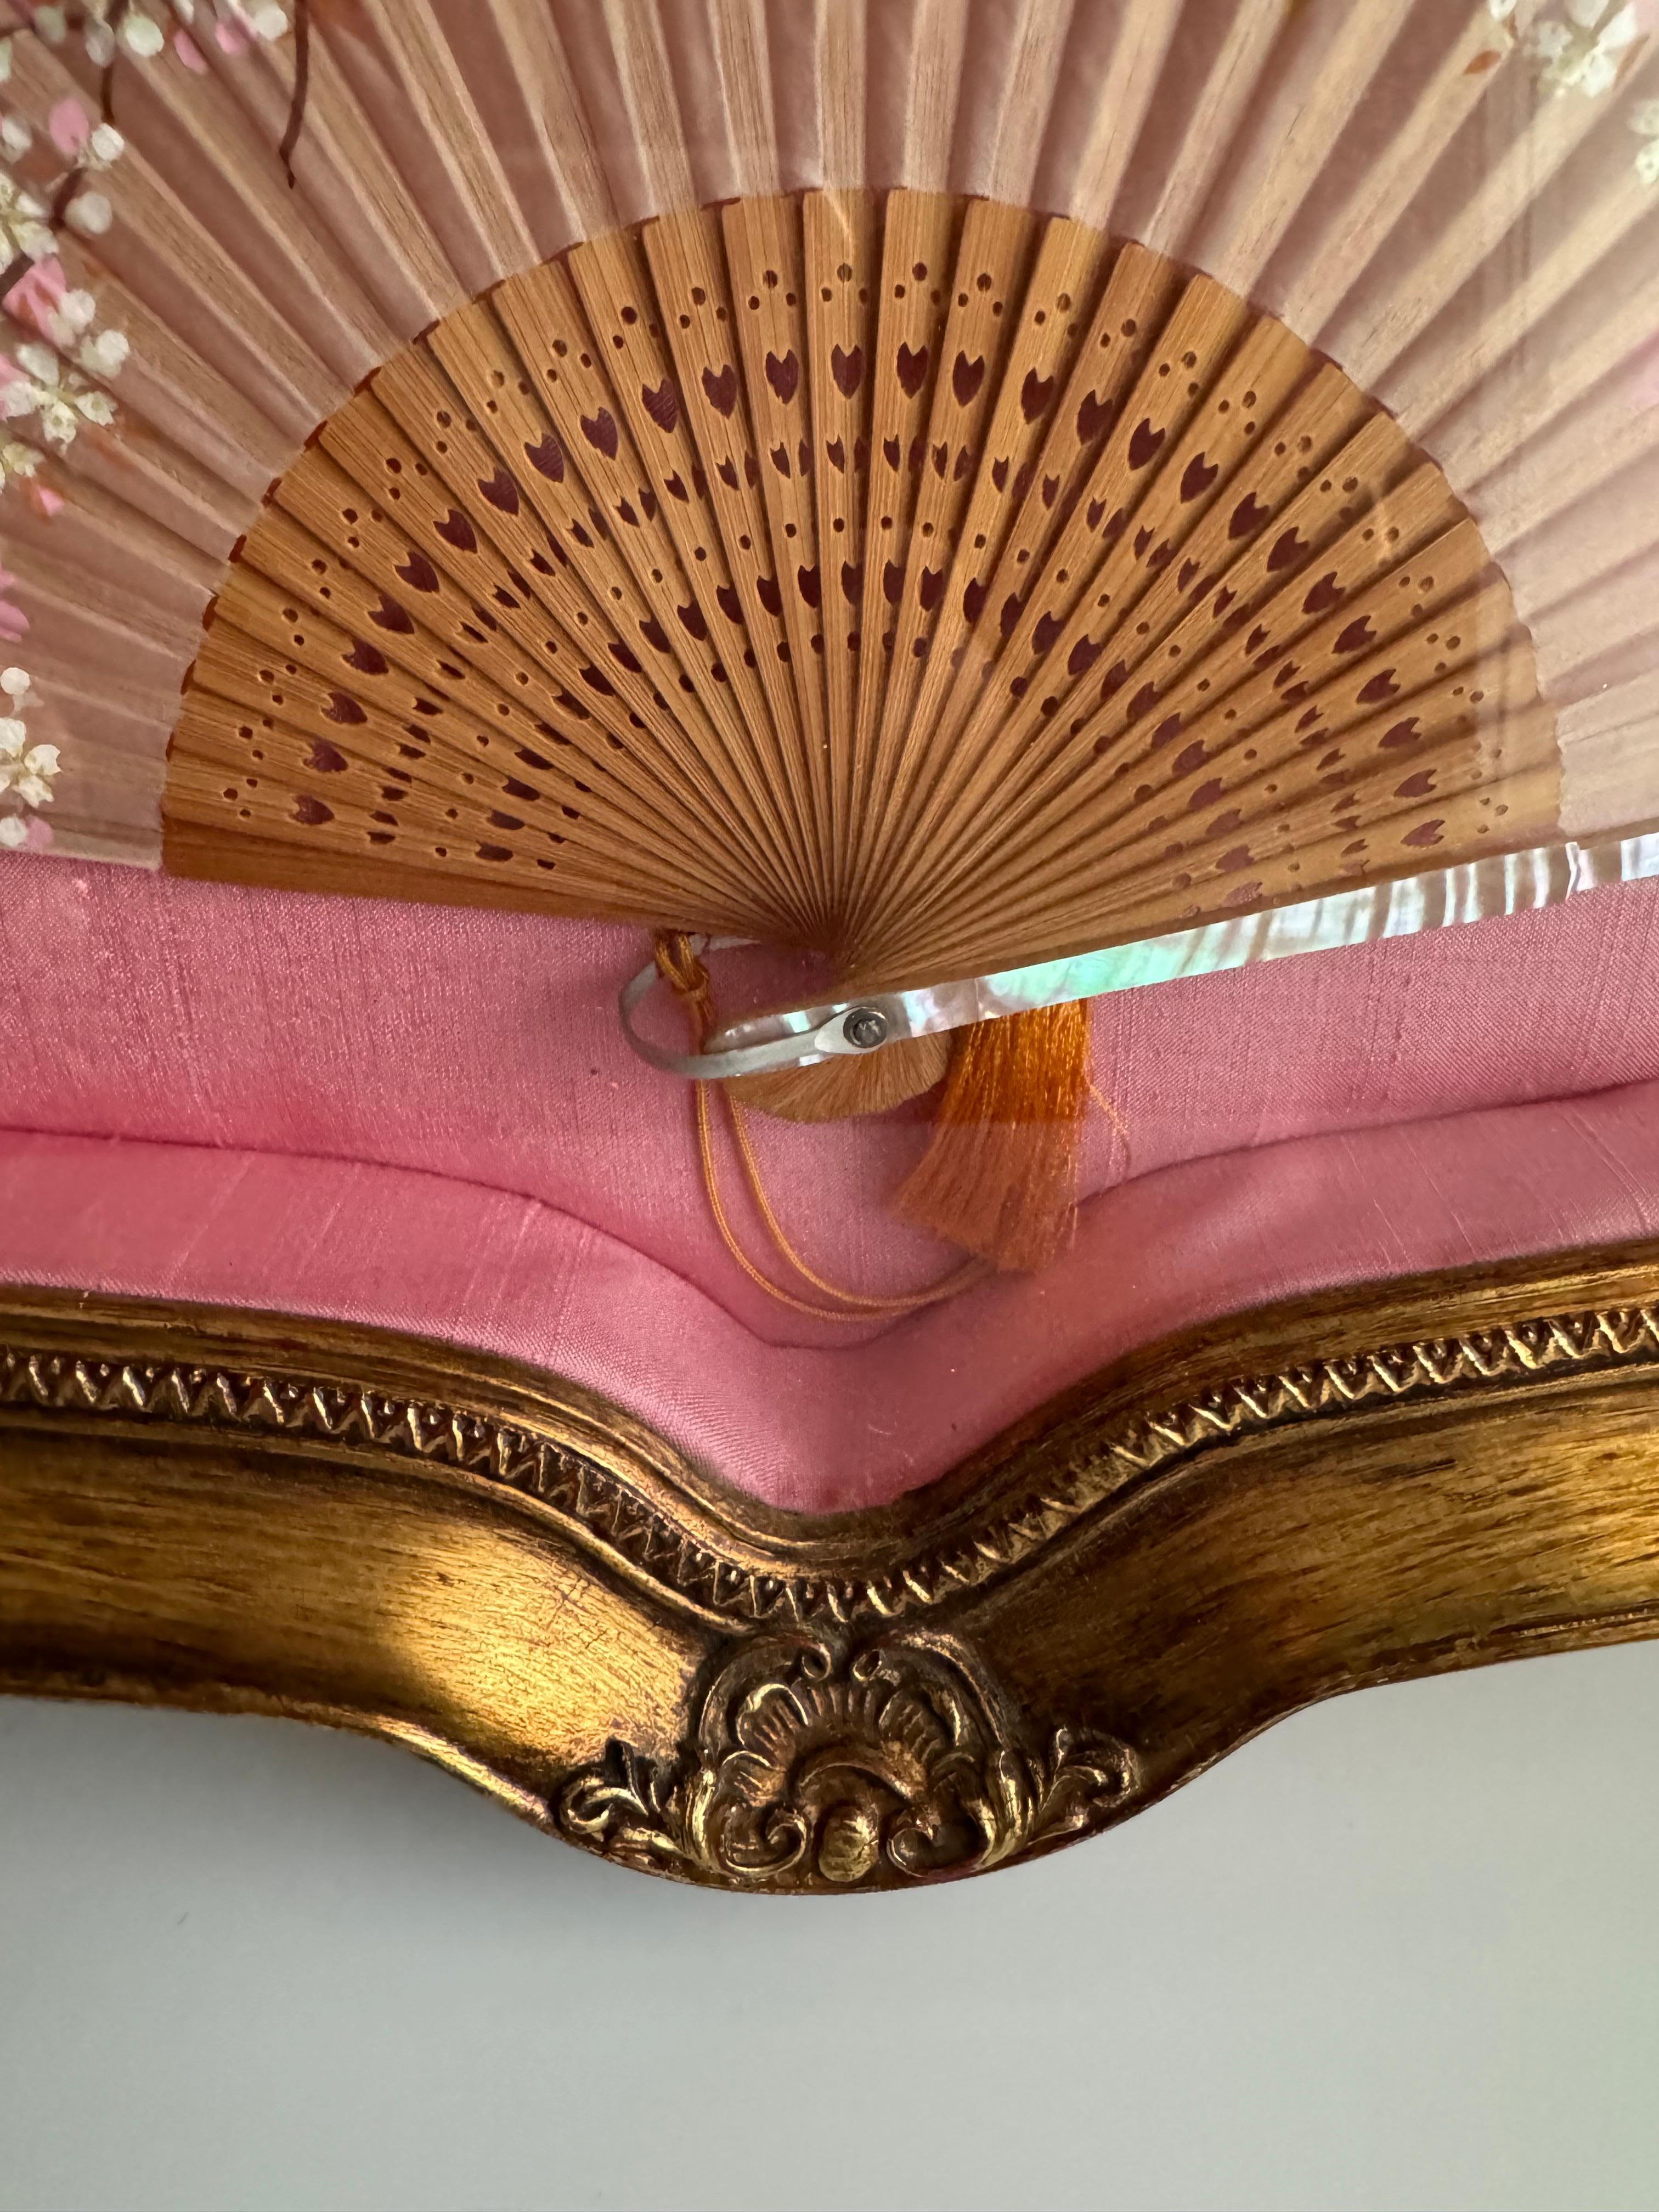 Gorgeous Japanese vintage fan . It features hand-painted Cherry Blossom details and inlaid mother of pearl elements. The fan is displayed within a shadow box frame, which seems to be lined with pink silk, enhancing its aesthetic appeal. The frame